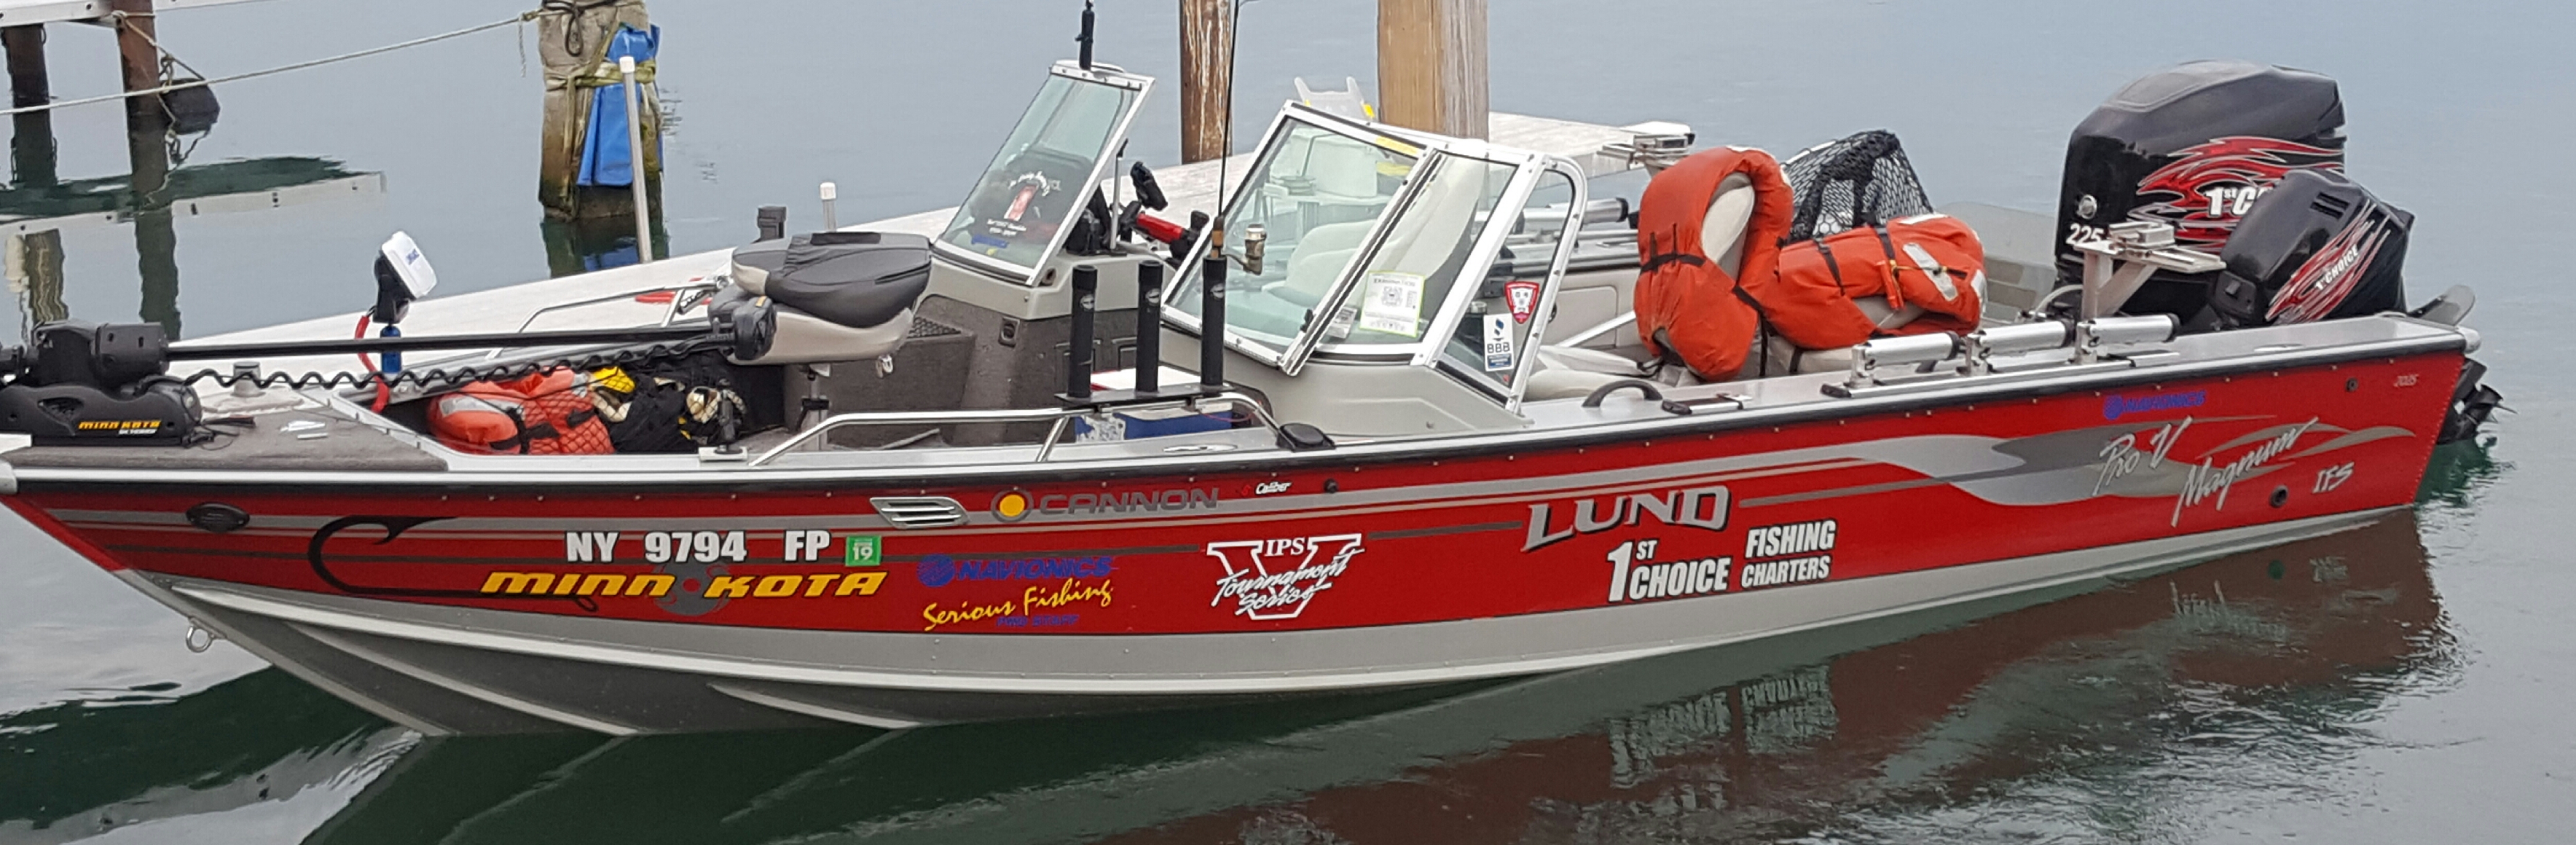 Lake Erie & Lake Ontario Fishing Charter Boats by 1st Choice